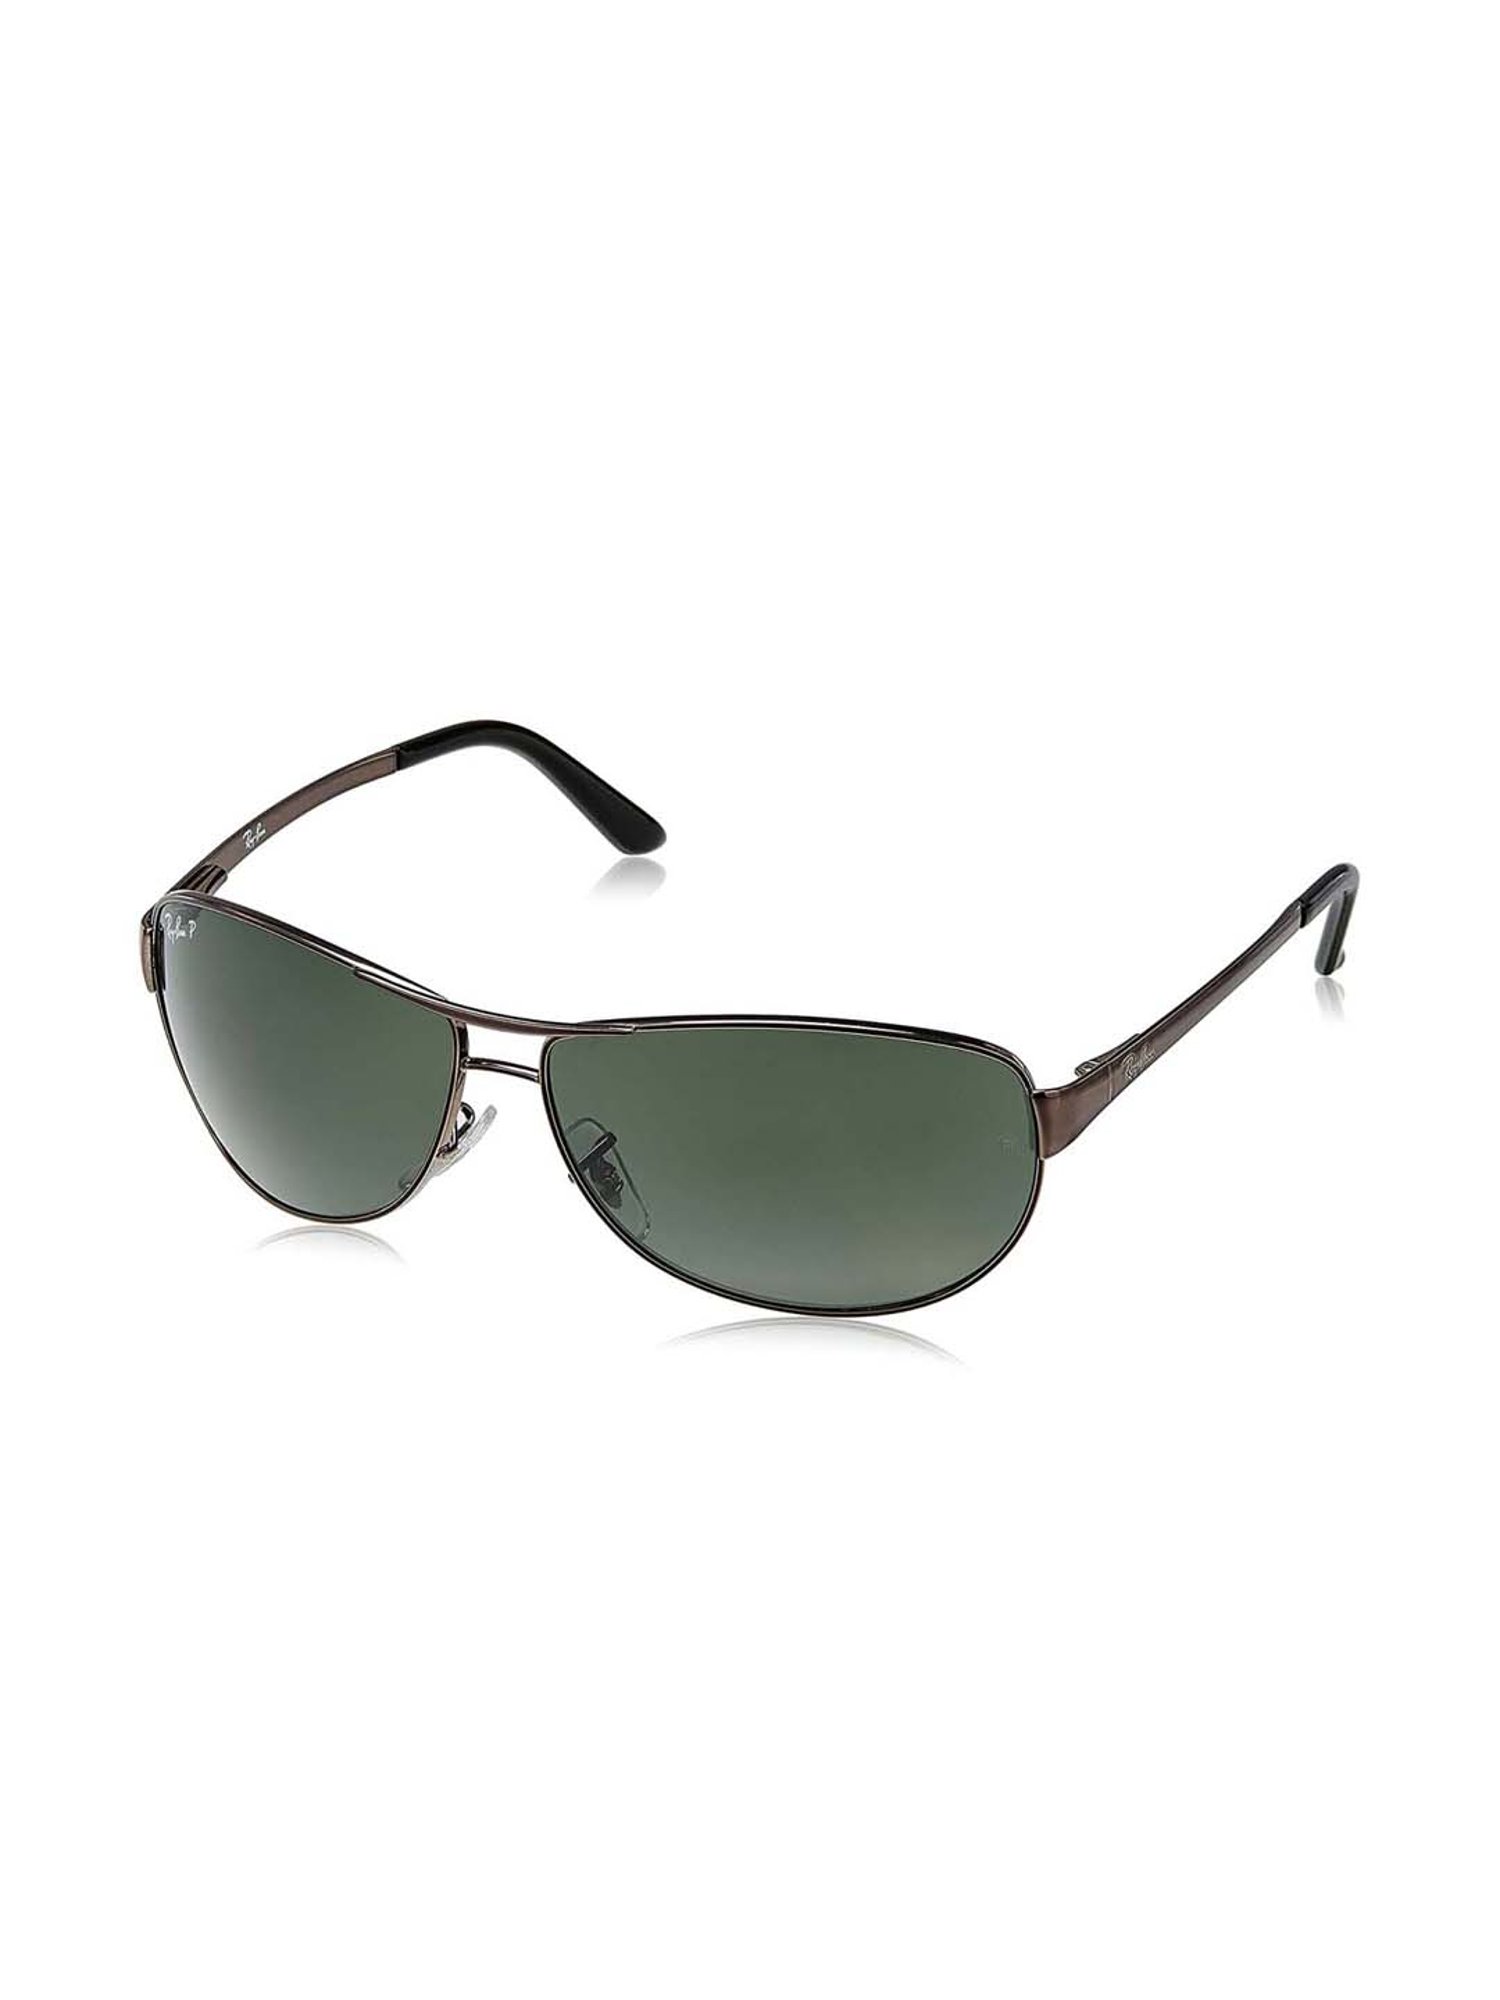 Shop online for Ray-Ban RB3342 Large (Size-60) Gunmetal Green 004/58 Unisex  Sunglasses